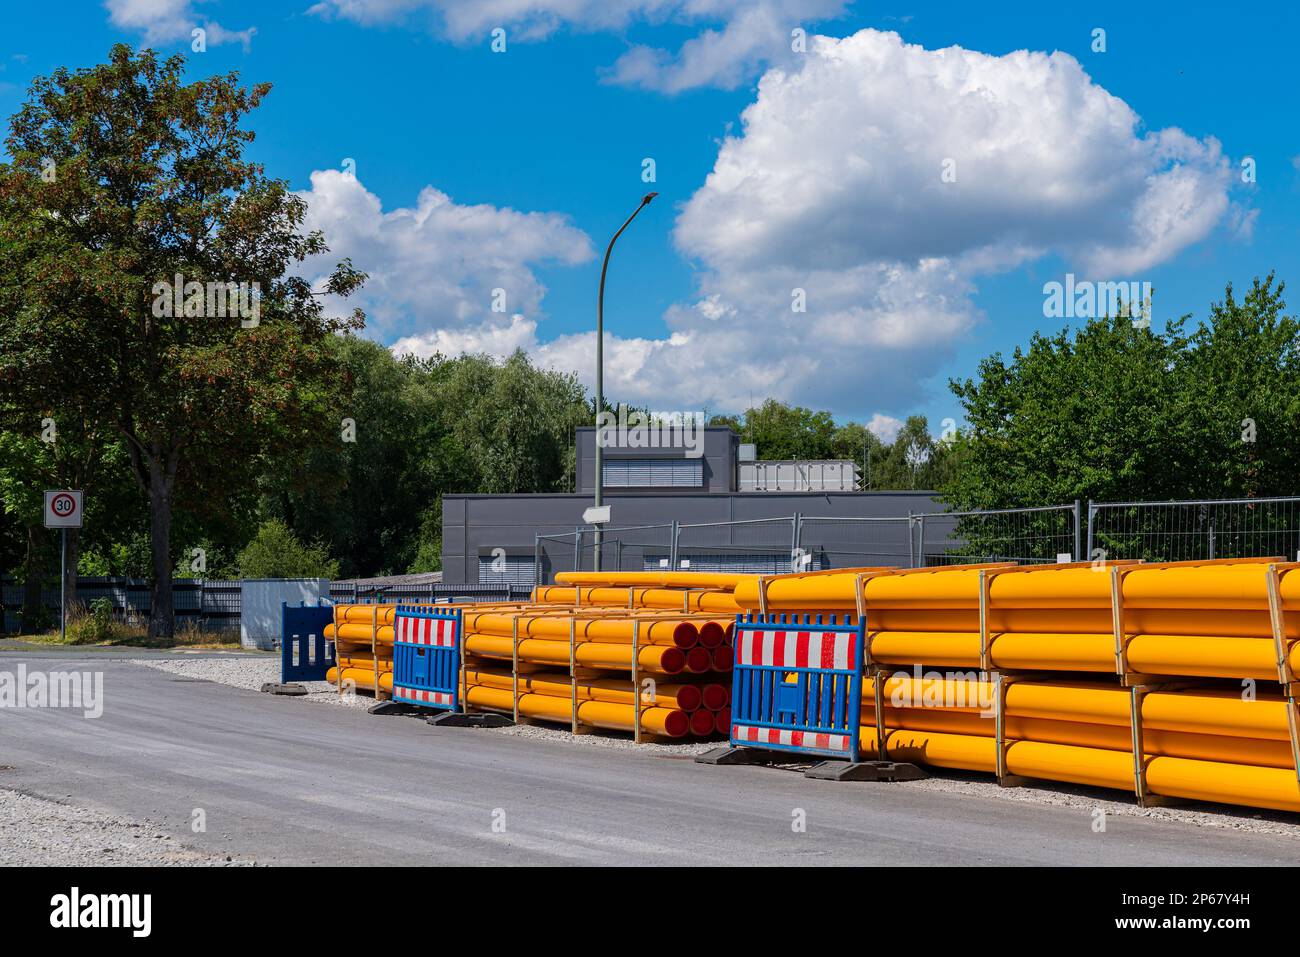 Stack of orang-yellow PVC conduit pipes along the road. Construction site in city. Stock Photo